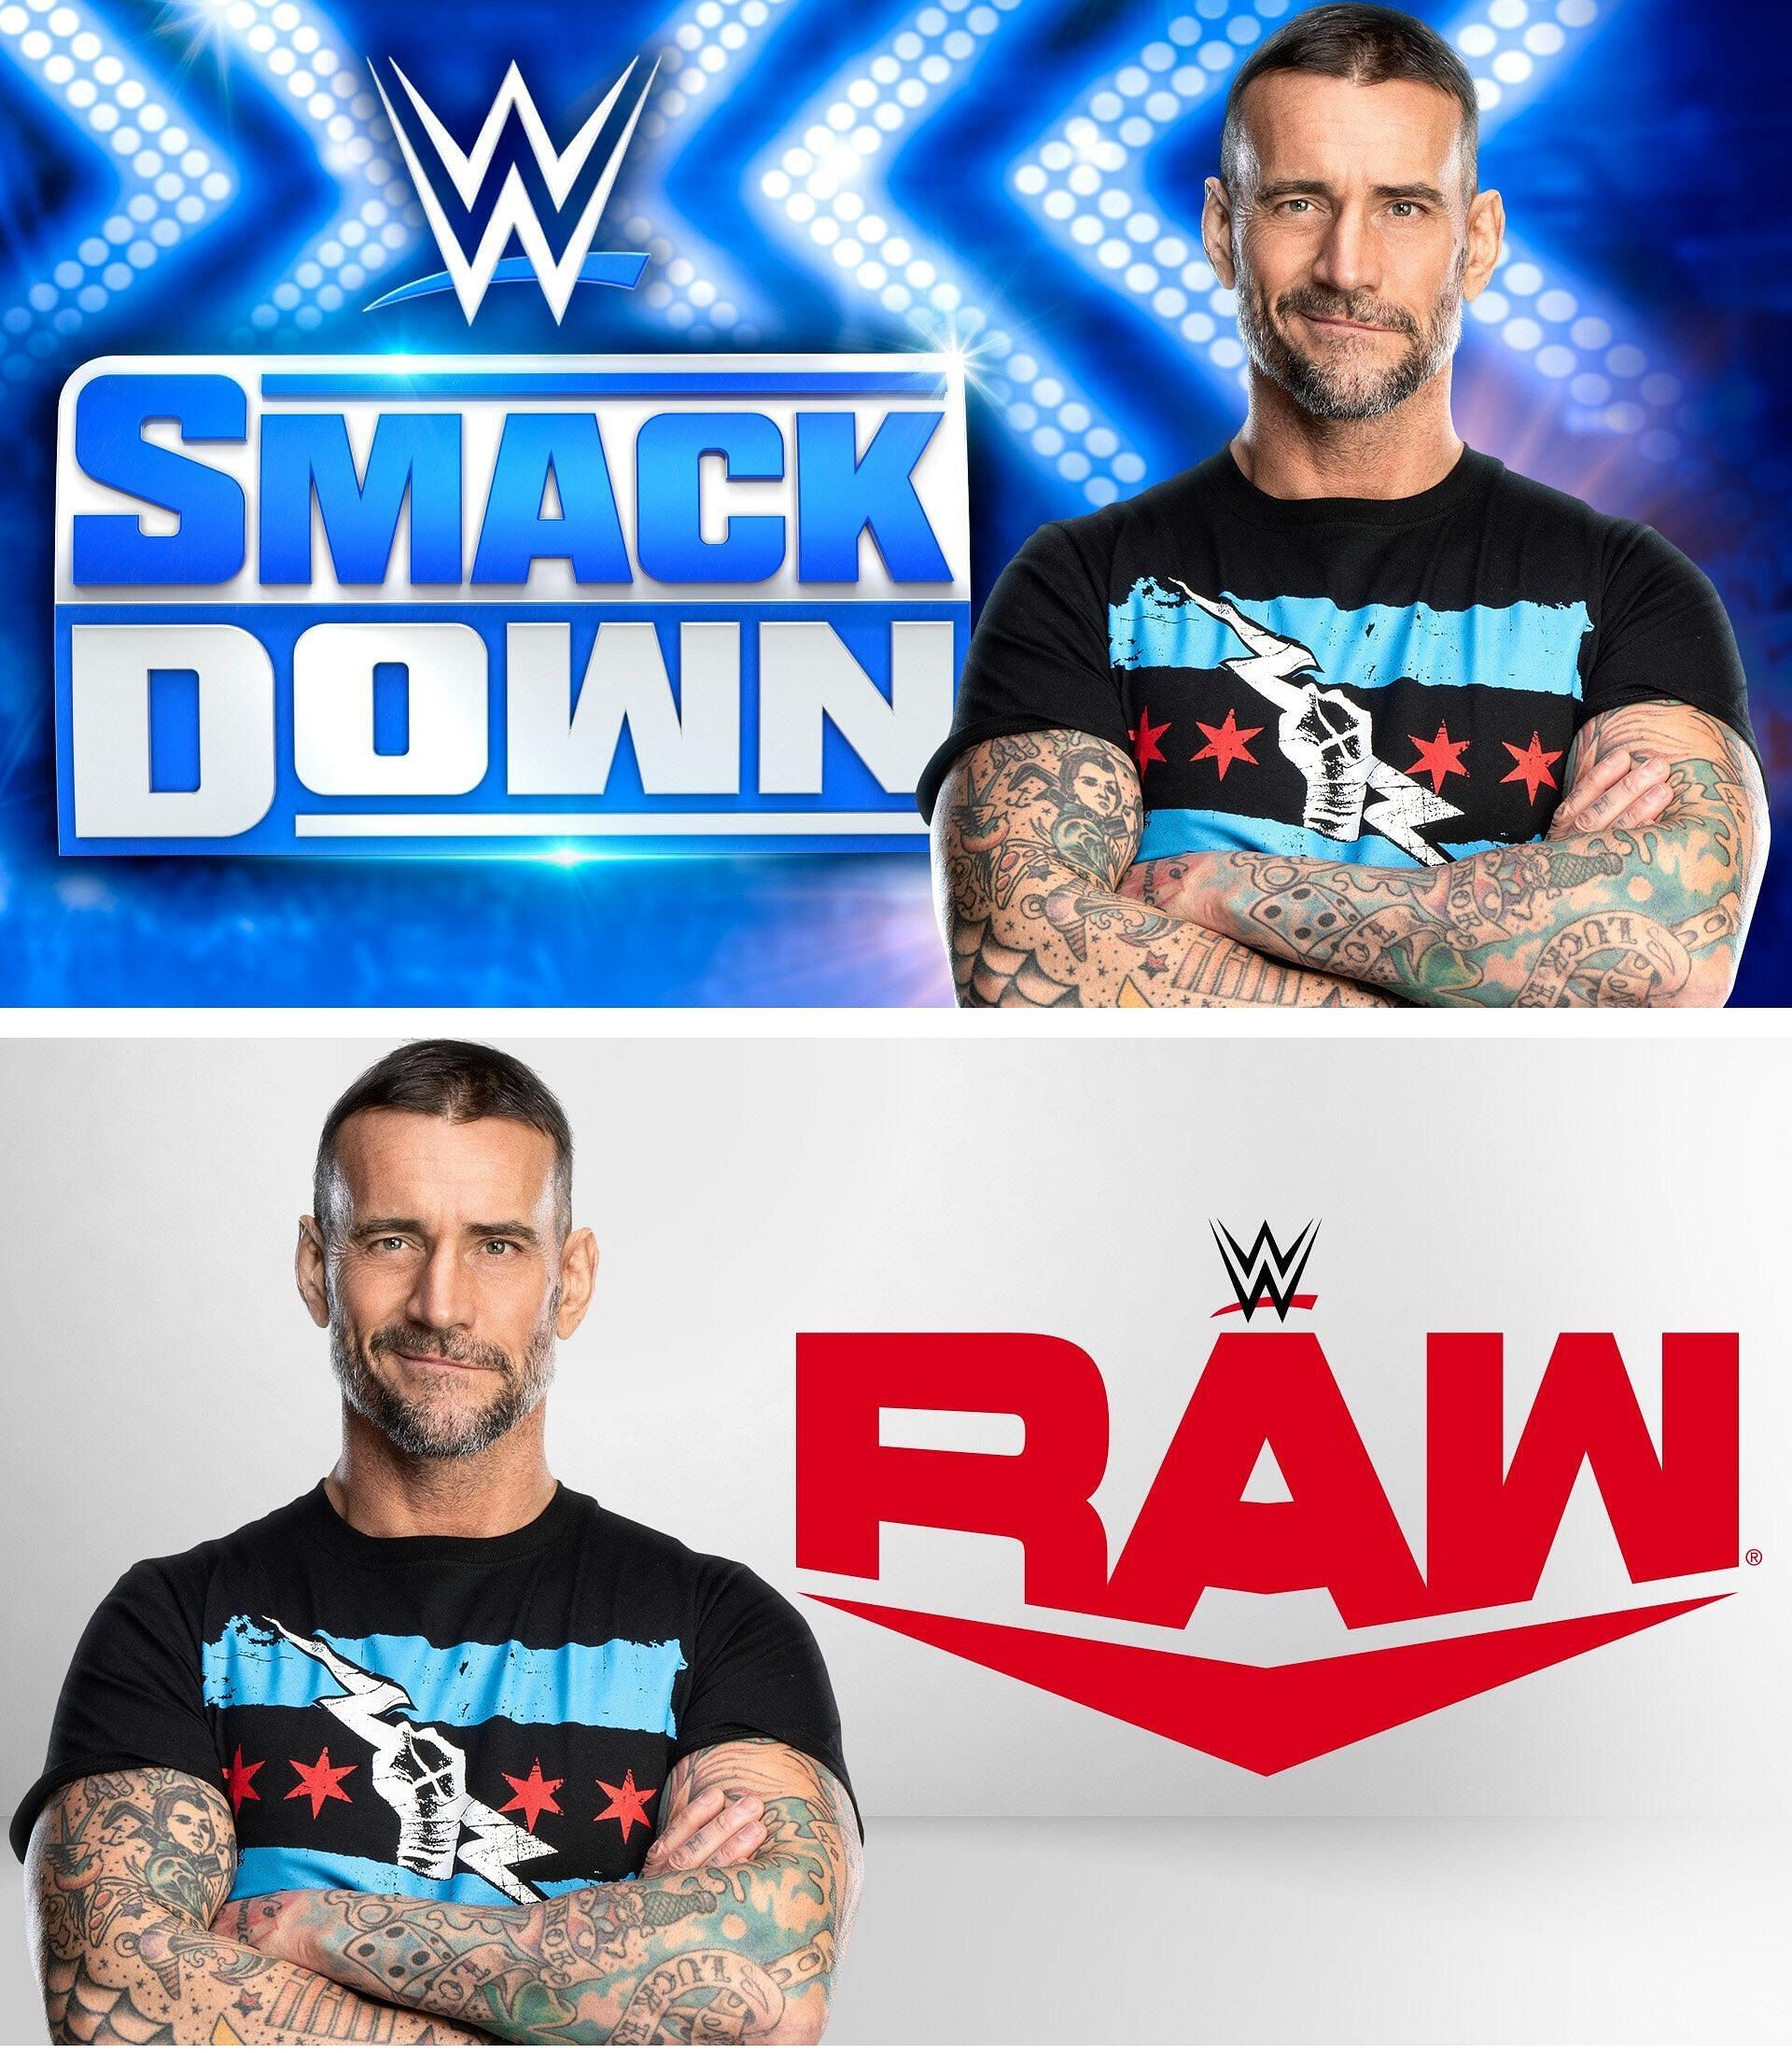 CM Punk featured on RAW and SmackDown graphics for the WWE Draft